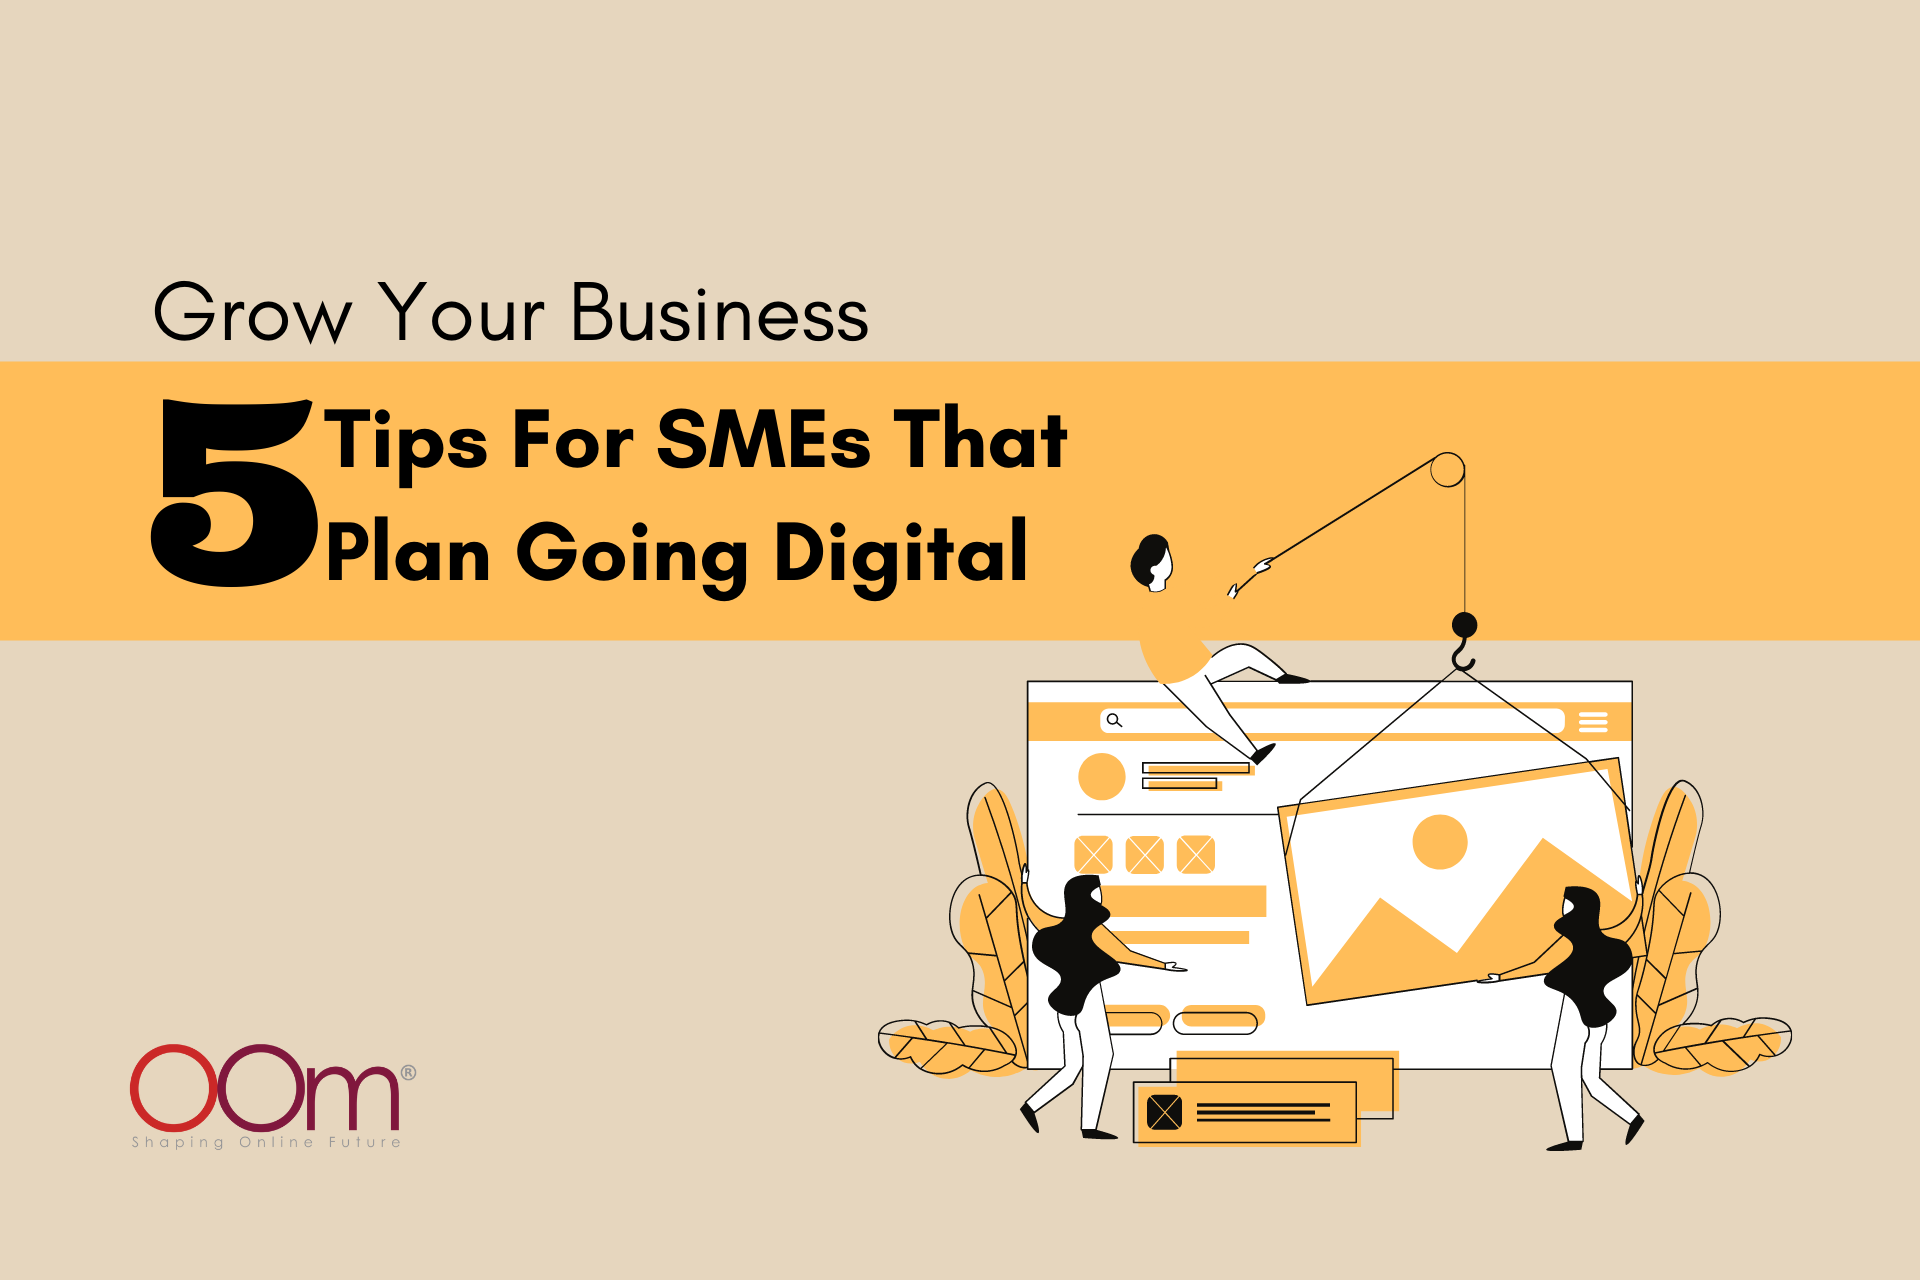 Grow Your Business Tips For SMEs That Plan Going Digital